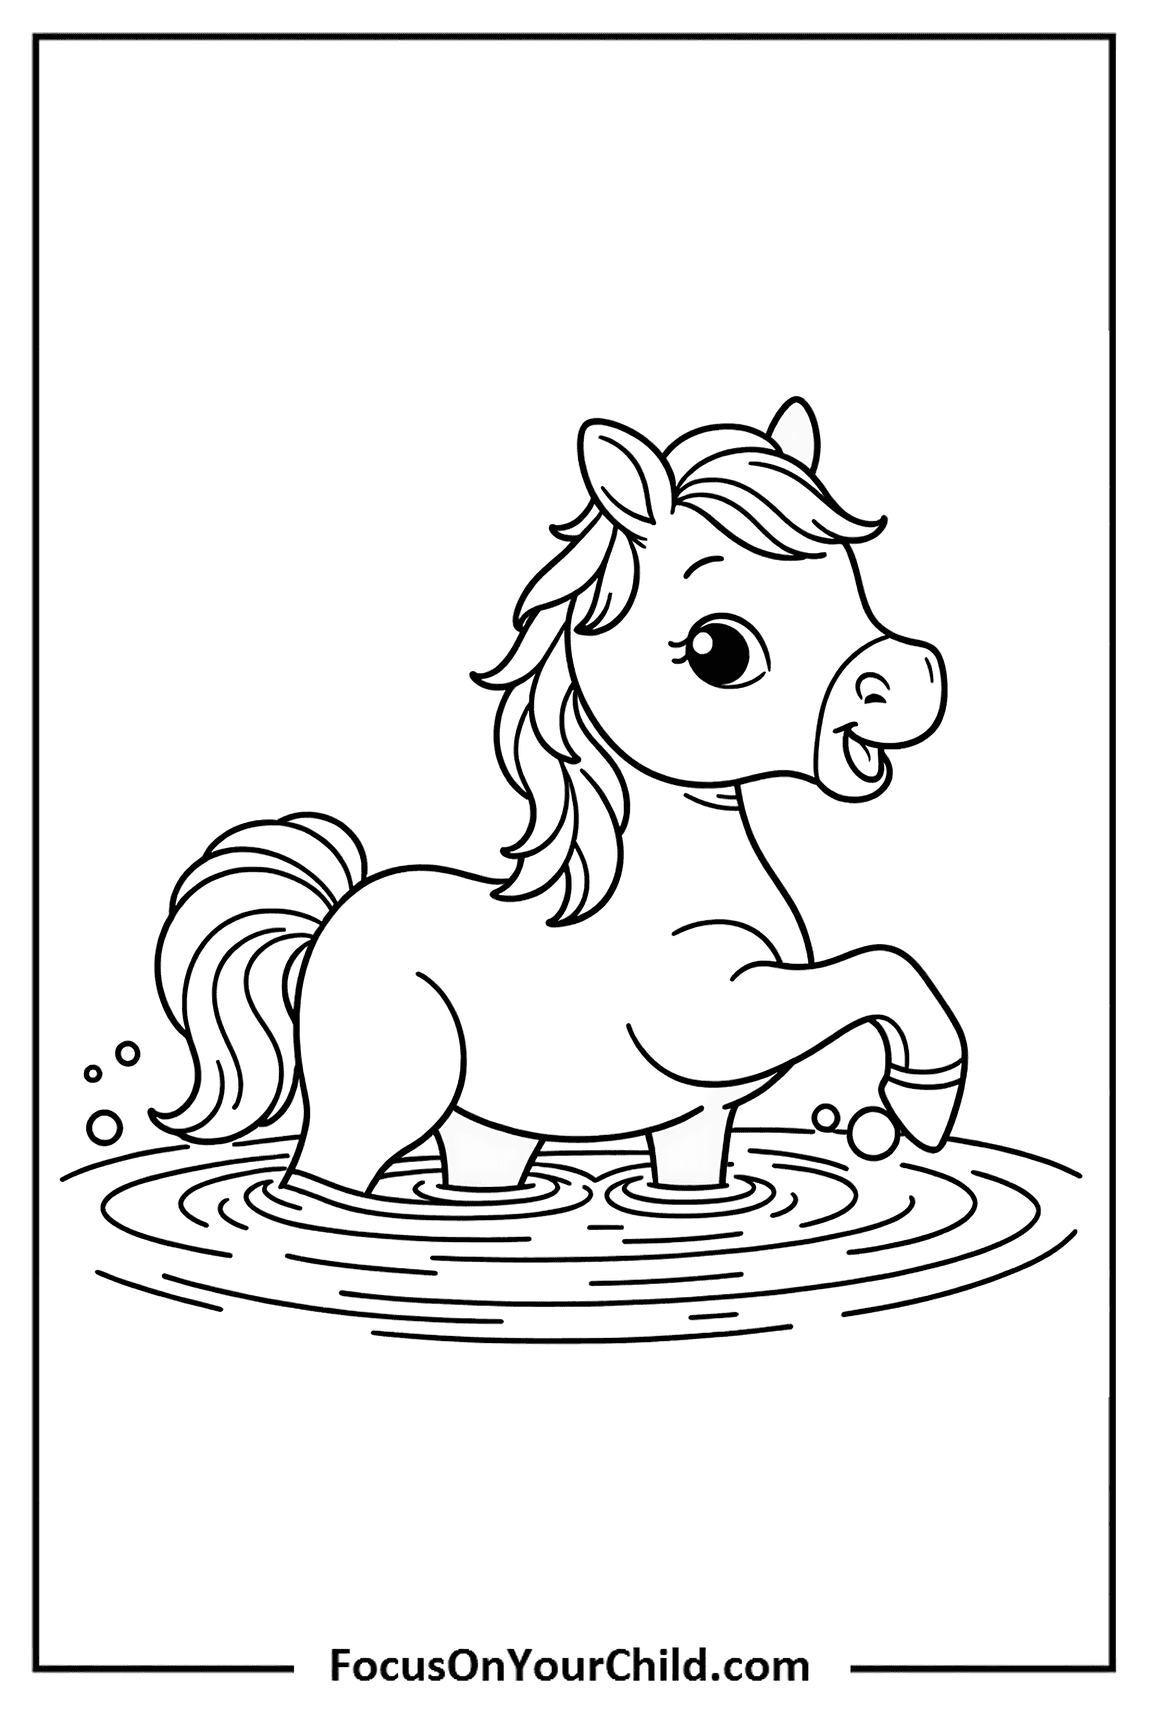 Adorable pony standing in water, perfect for coloring pages, on FocusOnYourChild.com.